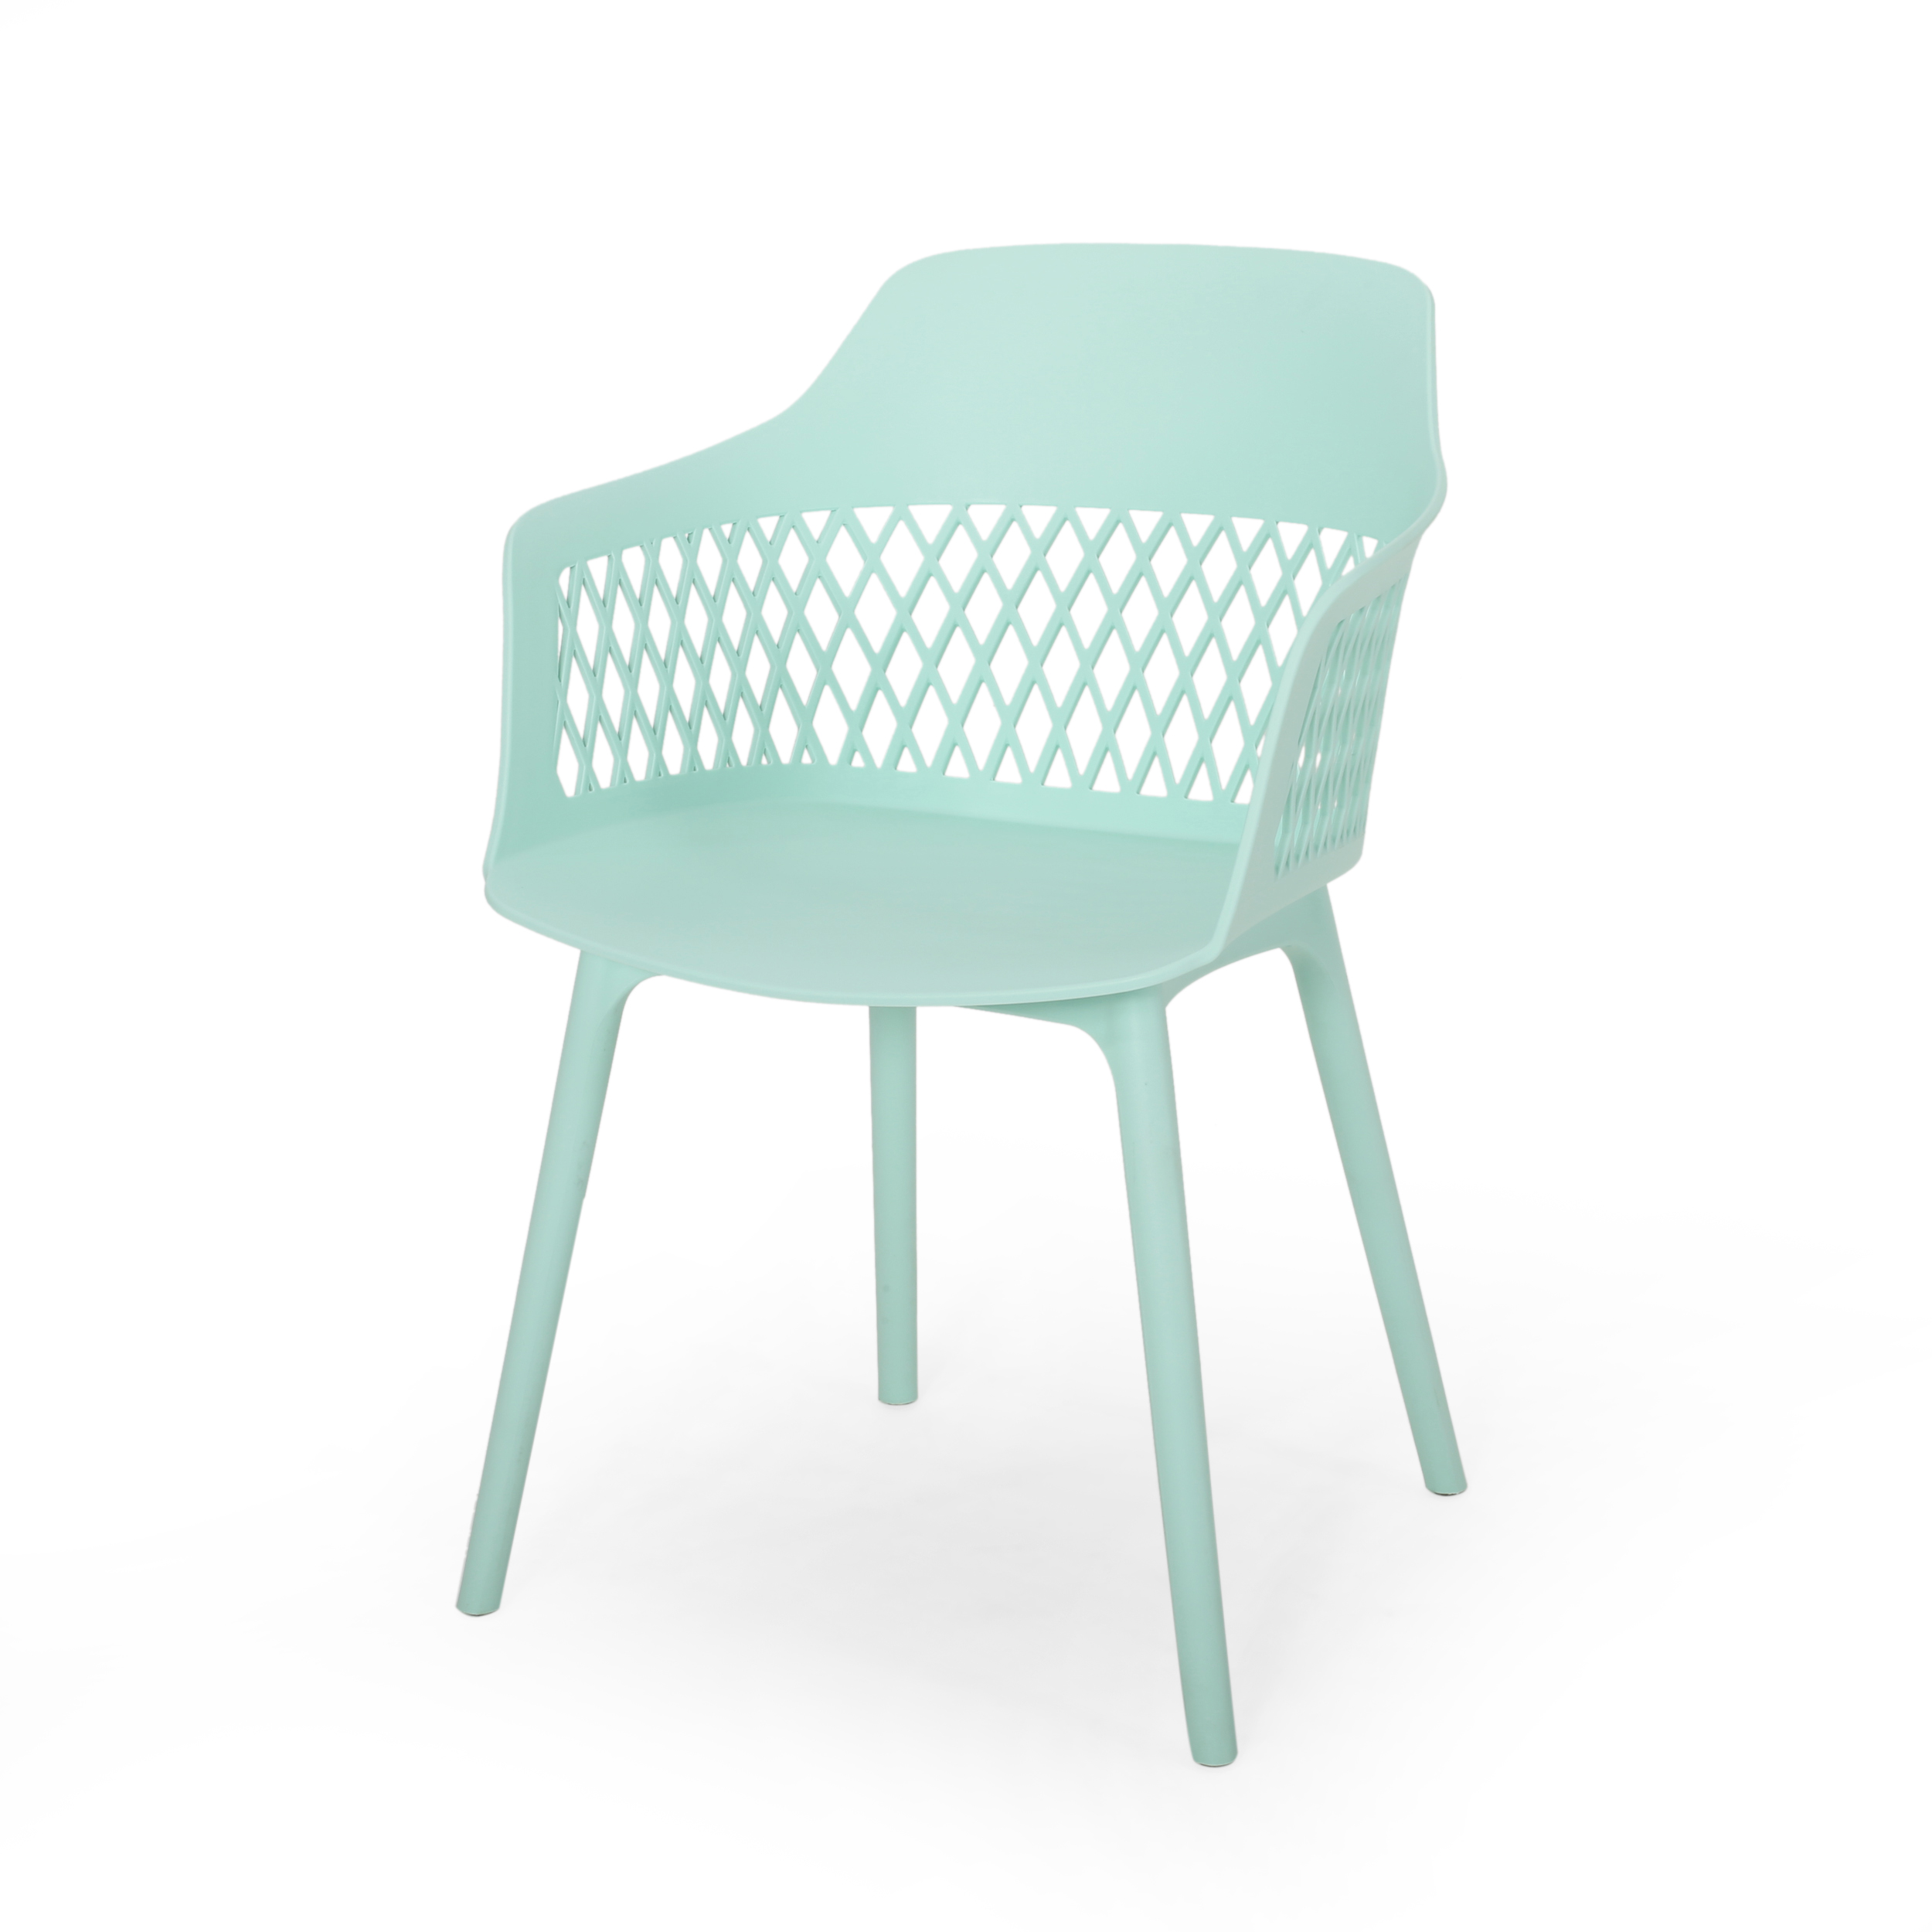 GDF Studio Airyanna Outdoor Modern Dining Chair, Set of 4, Mint - image 4 of 7